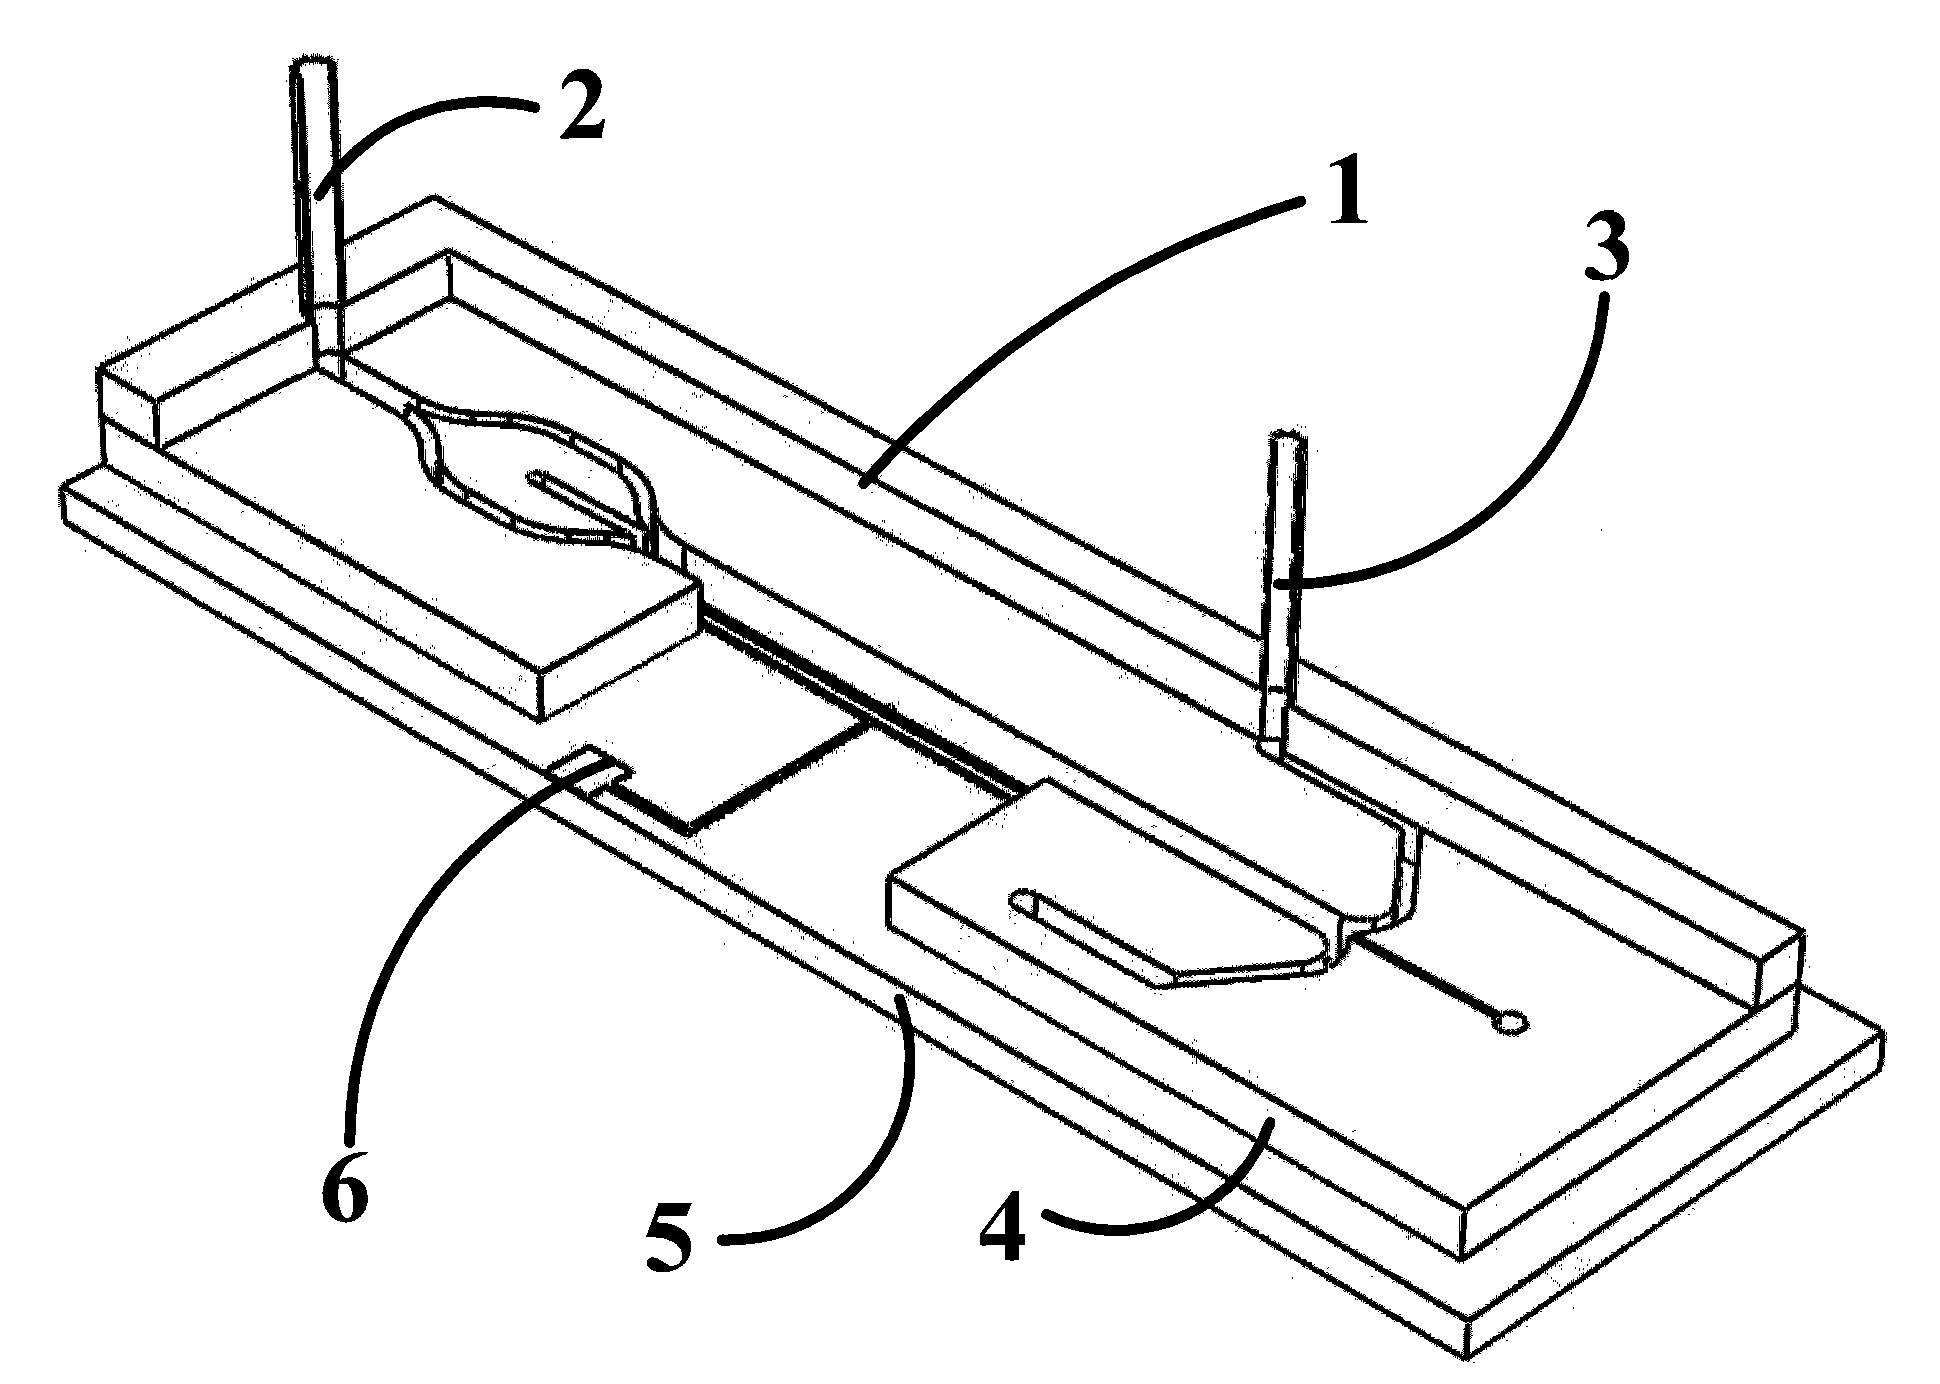 Flow type electroporation device and system